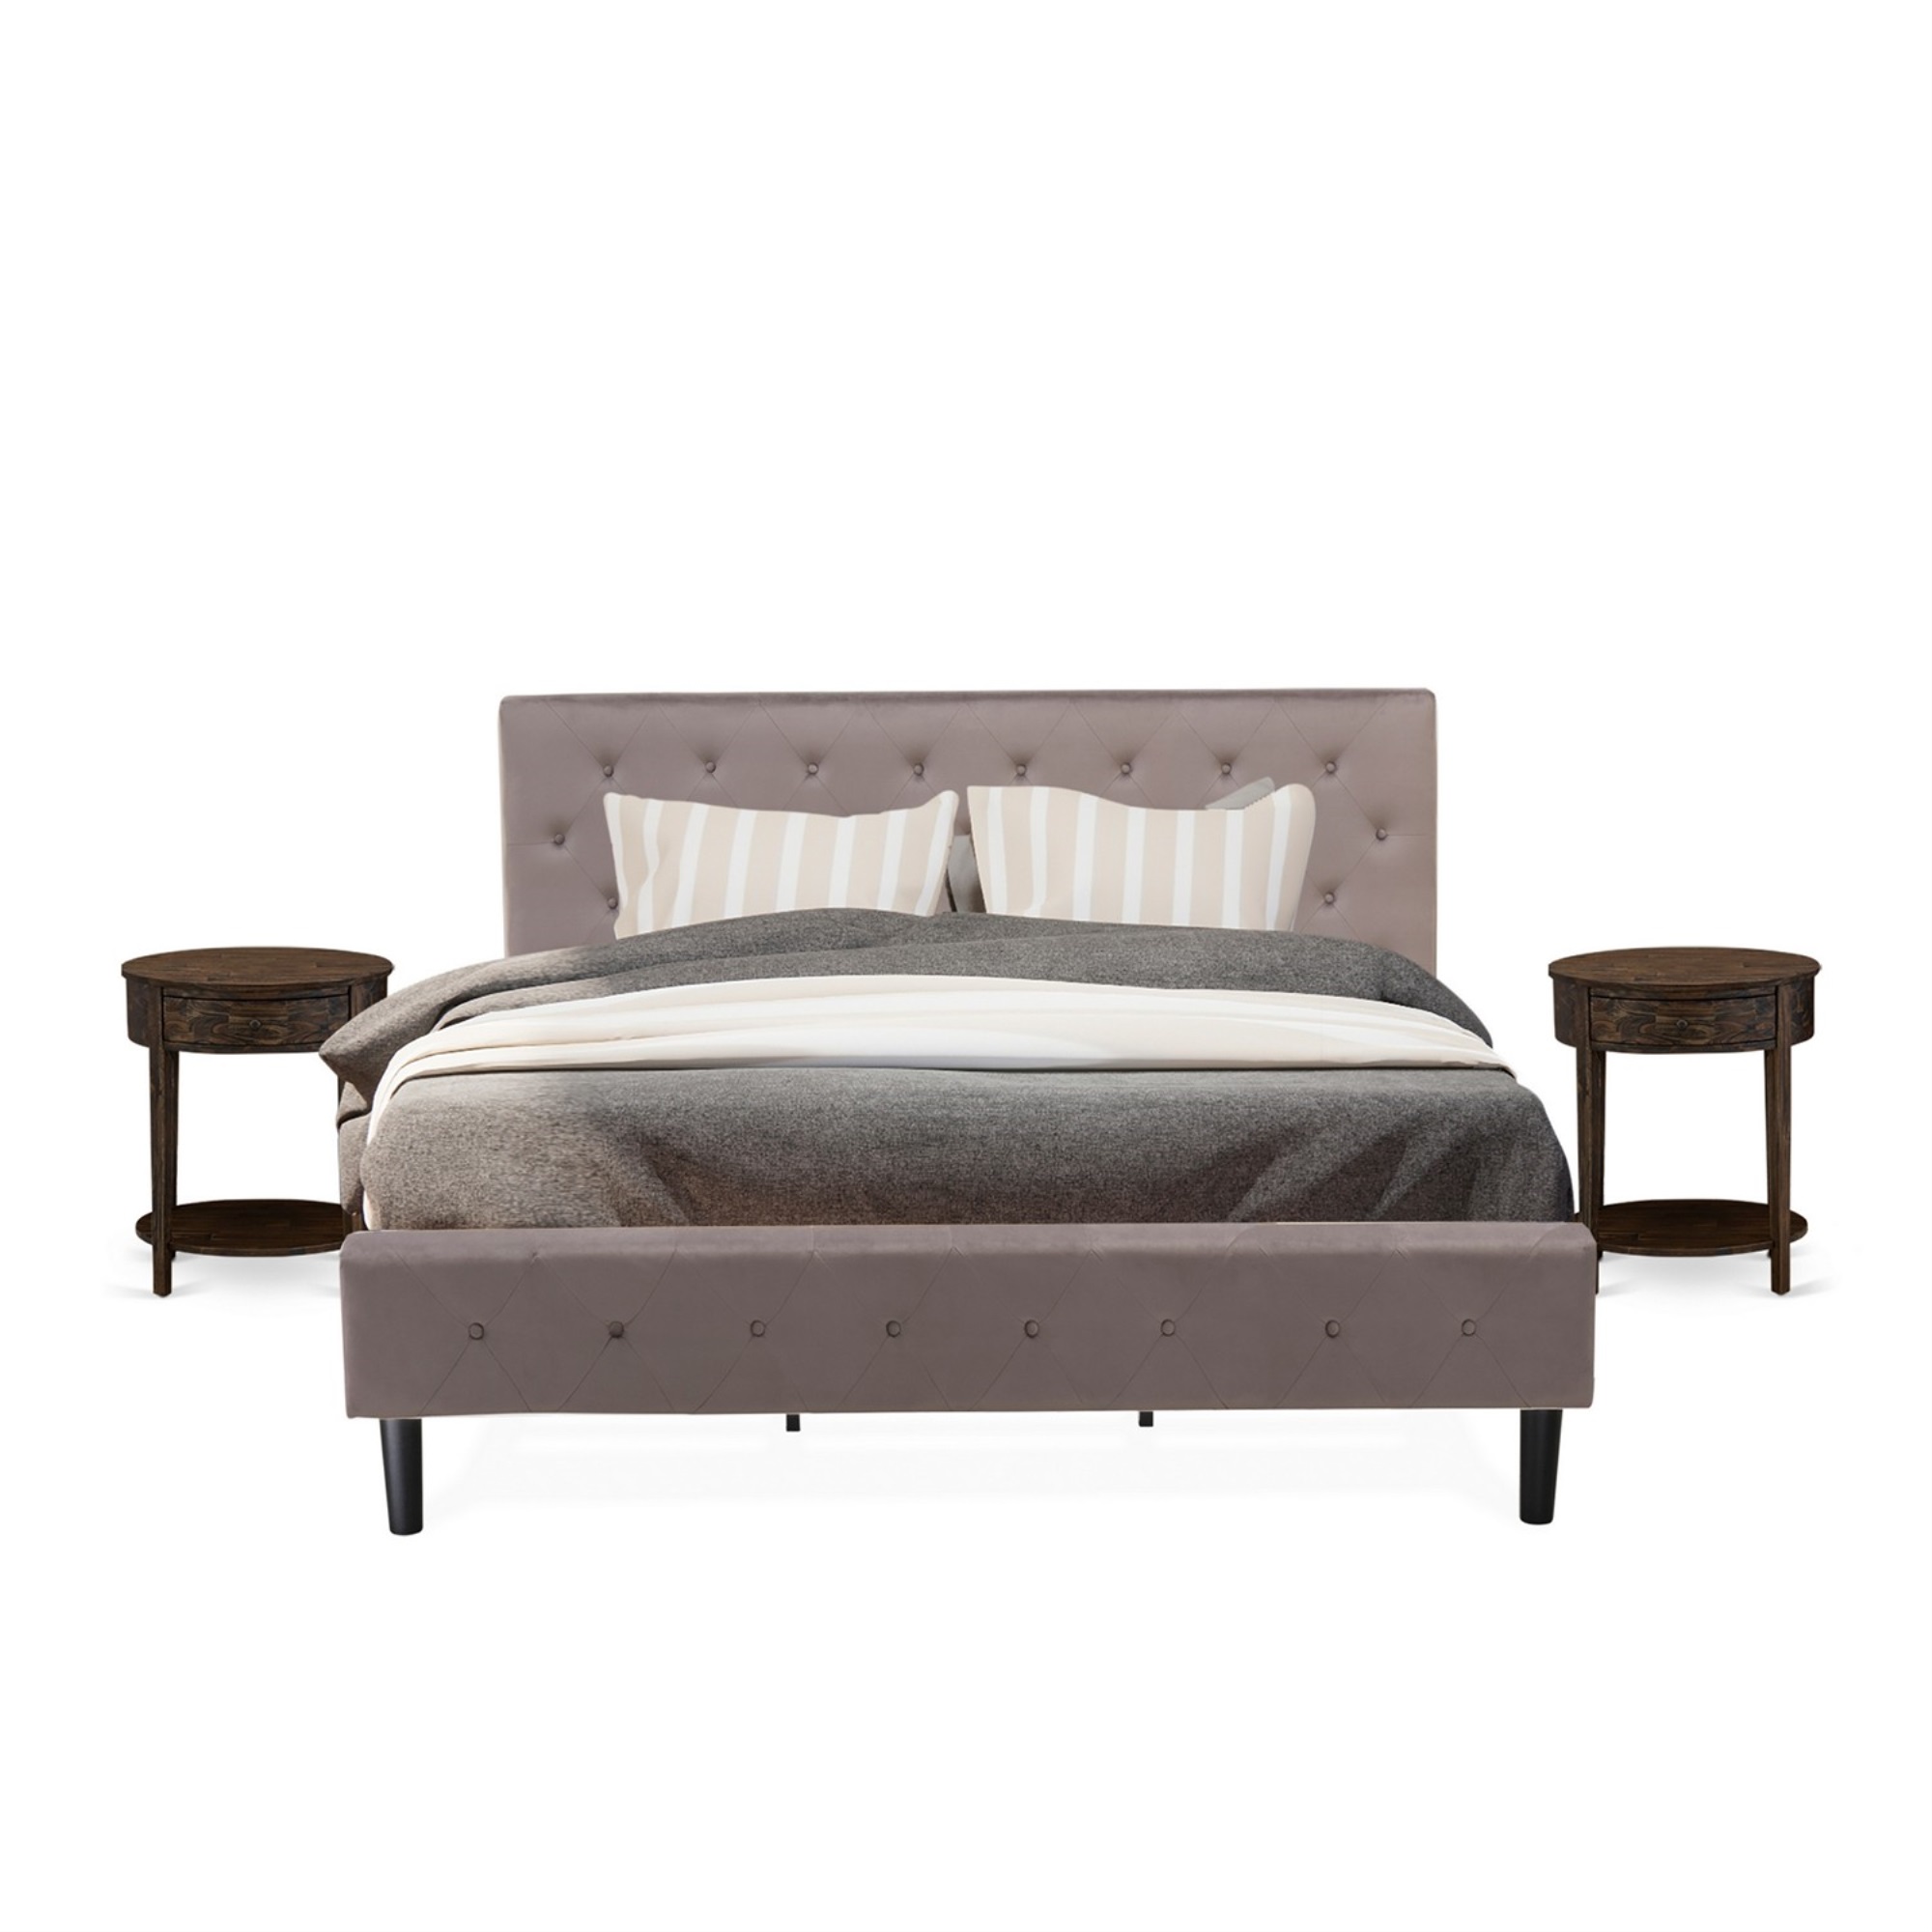 East West Furniture NL14K-2HI07 3 Piece King Bed Set - Button Tufted Modern Bed Frame - Brown Taupe Velvet Fabric Upholstered Headboard and a Dist